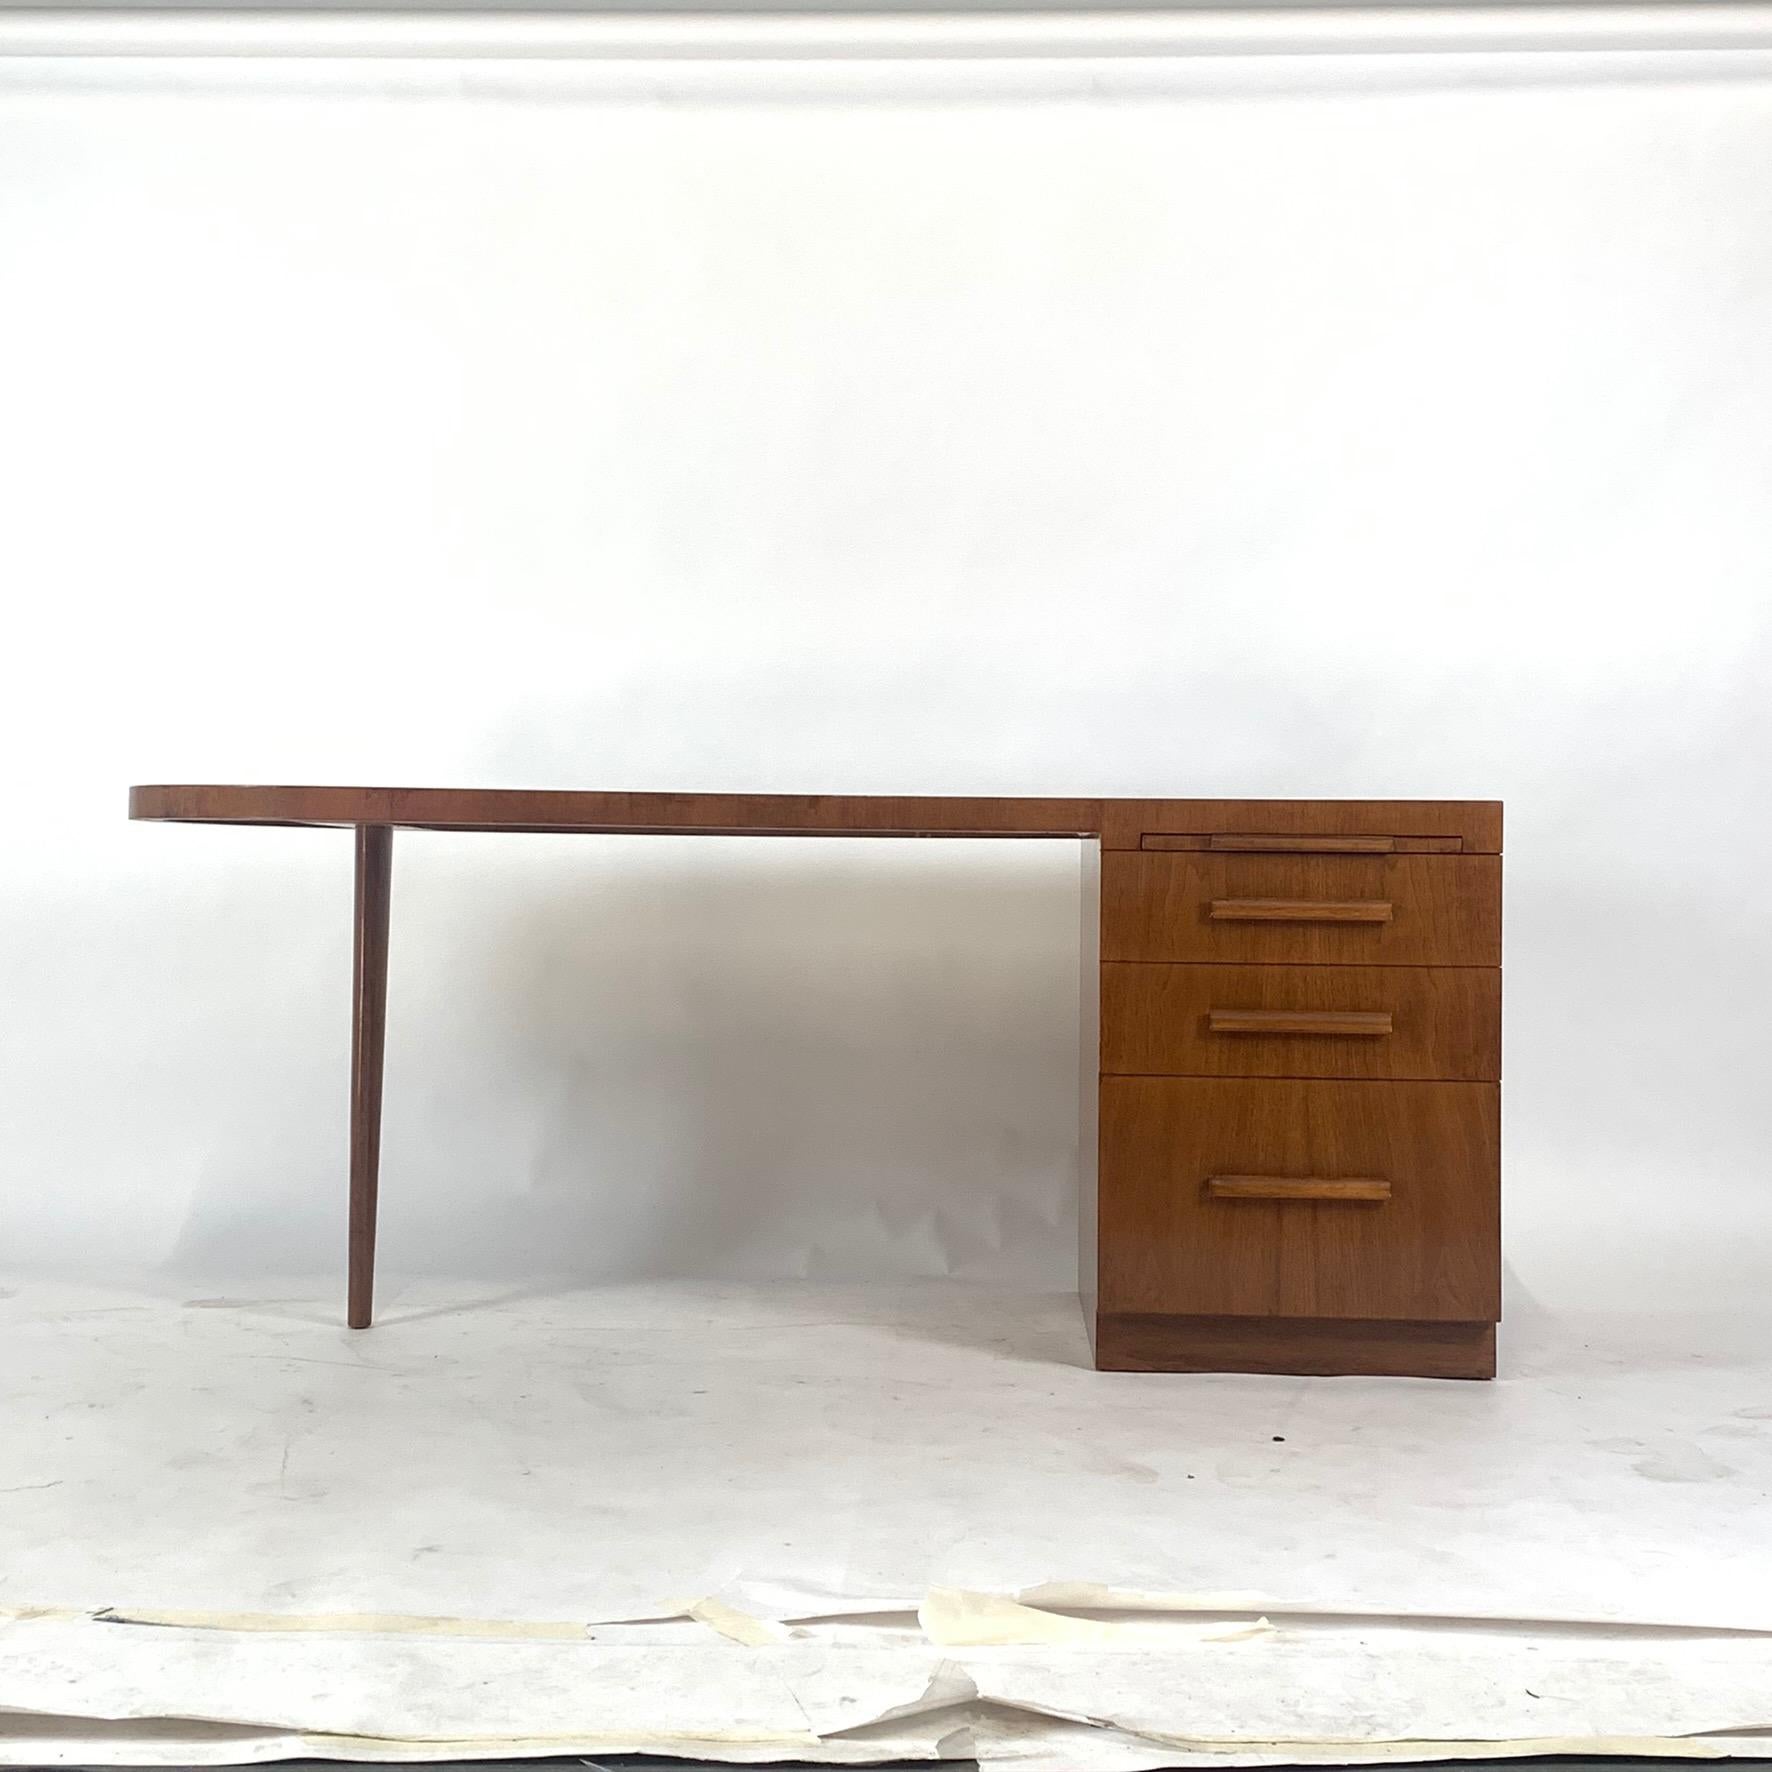 A modern executive desk, created by designer T.H. Robsjohn-Gibbings for Widdicomb circa 1950s, comes in birch and features three graduated drawers and pull-out writing surface, supporting a curved streamlined top on opposite single tapered leg. The